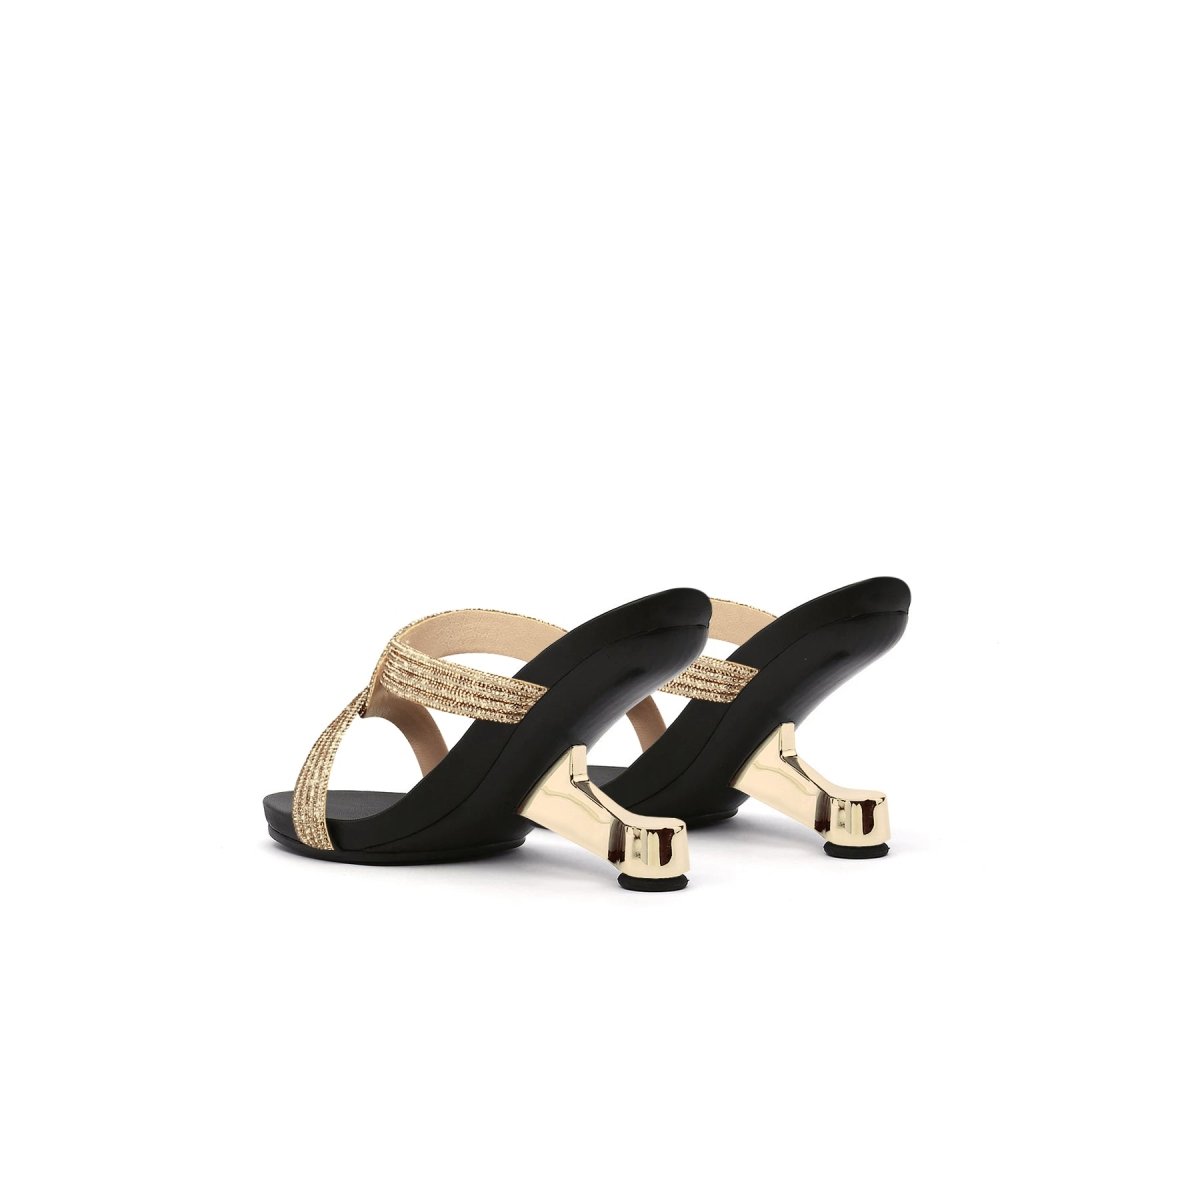 Bling Gal Braided Gold Mules - 0cm